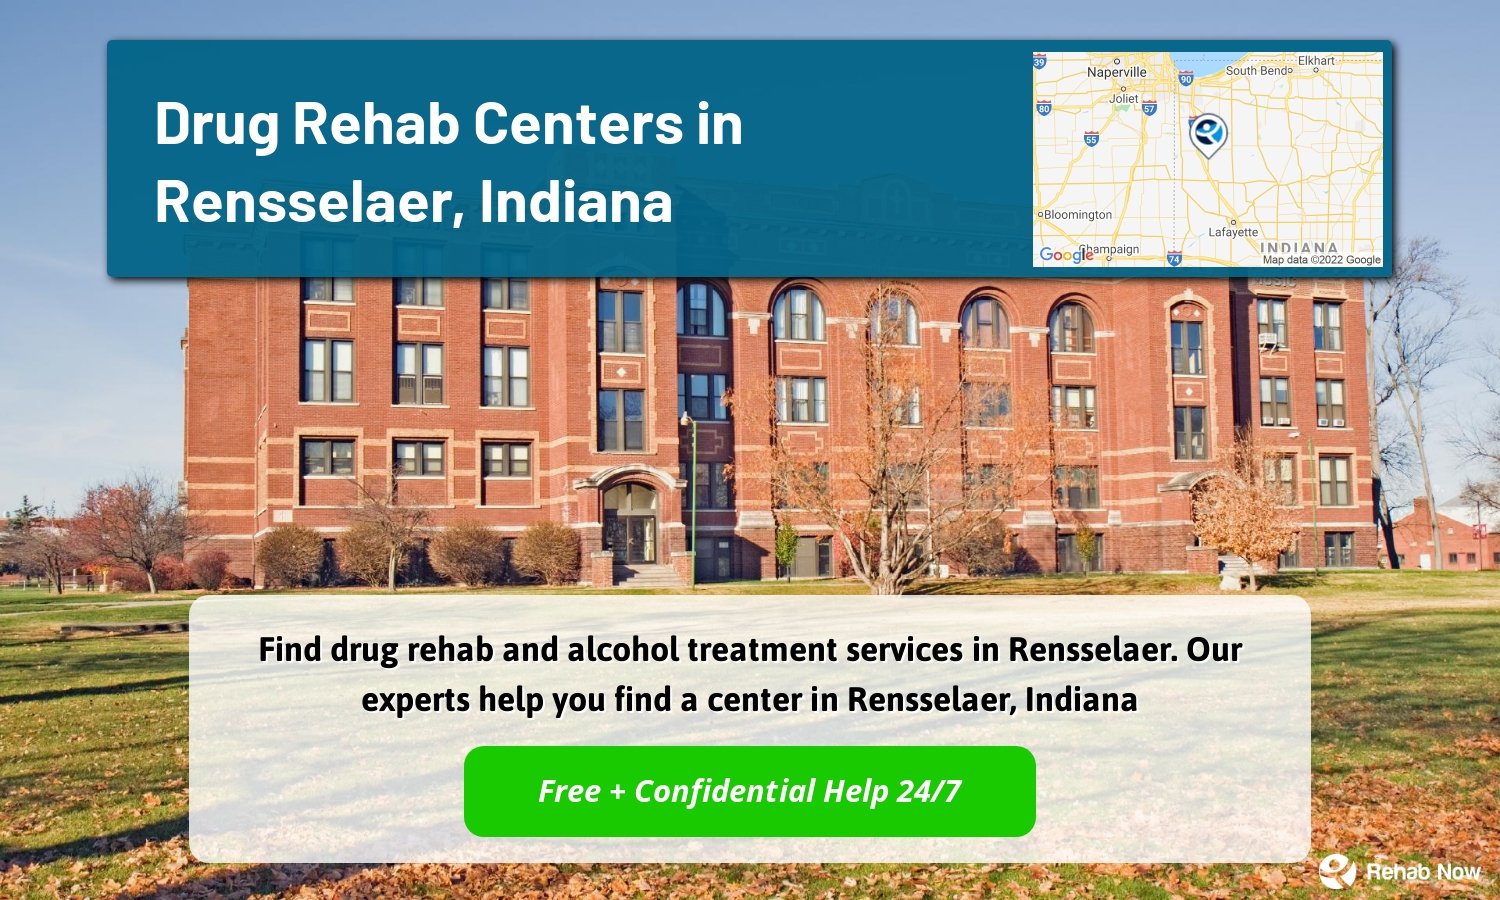 Find drug rehab and alcohol treatment services in Rensselaer. Our experts help you find a center in Rensselaer, Indiana